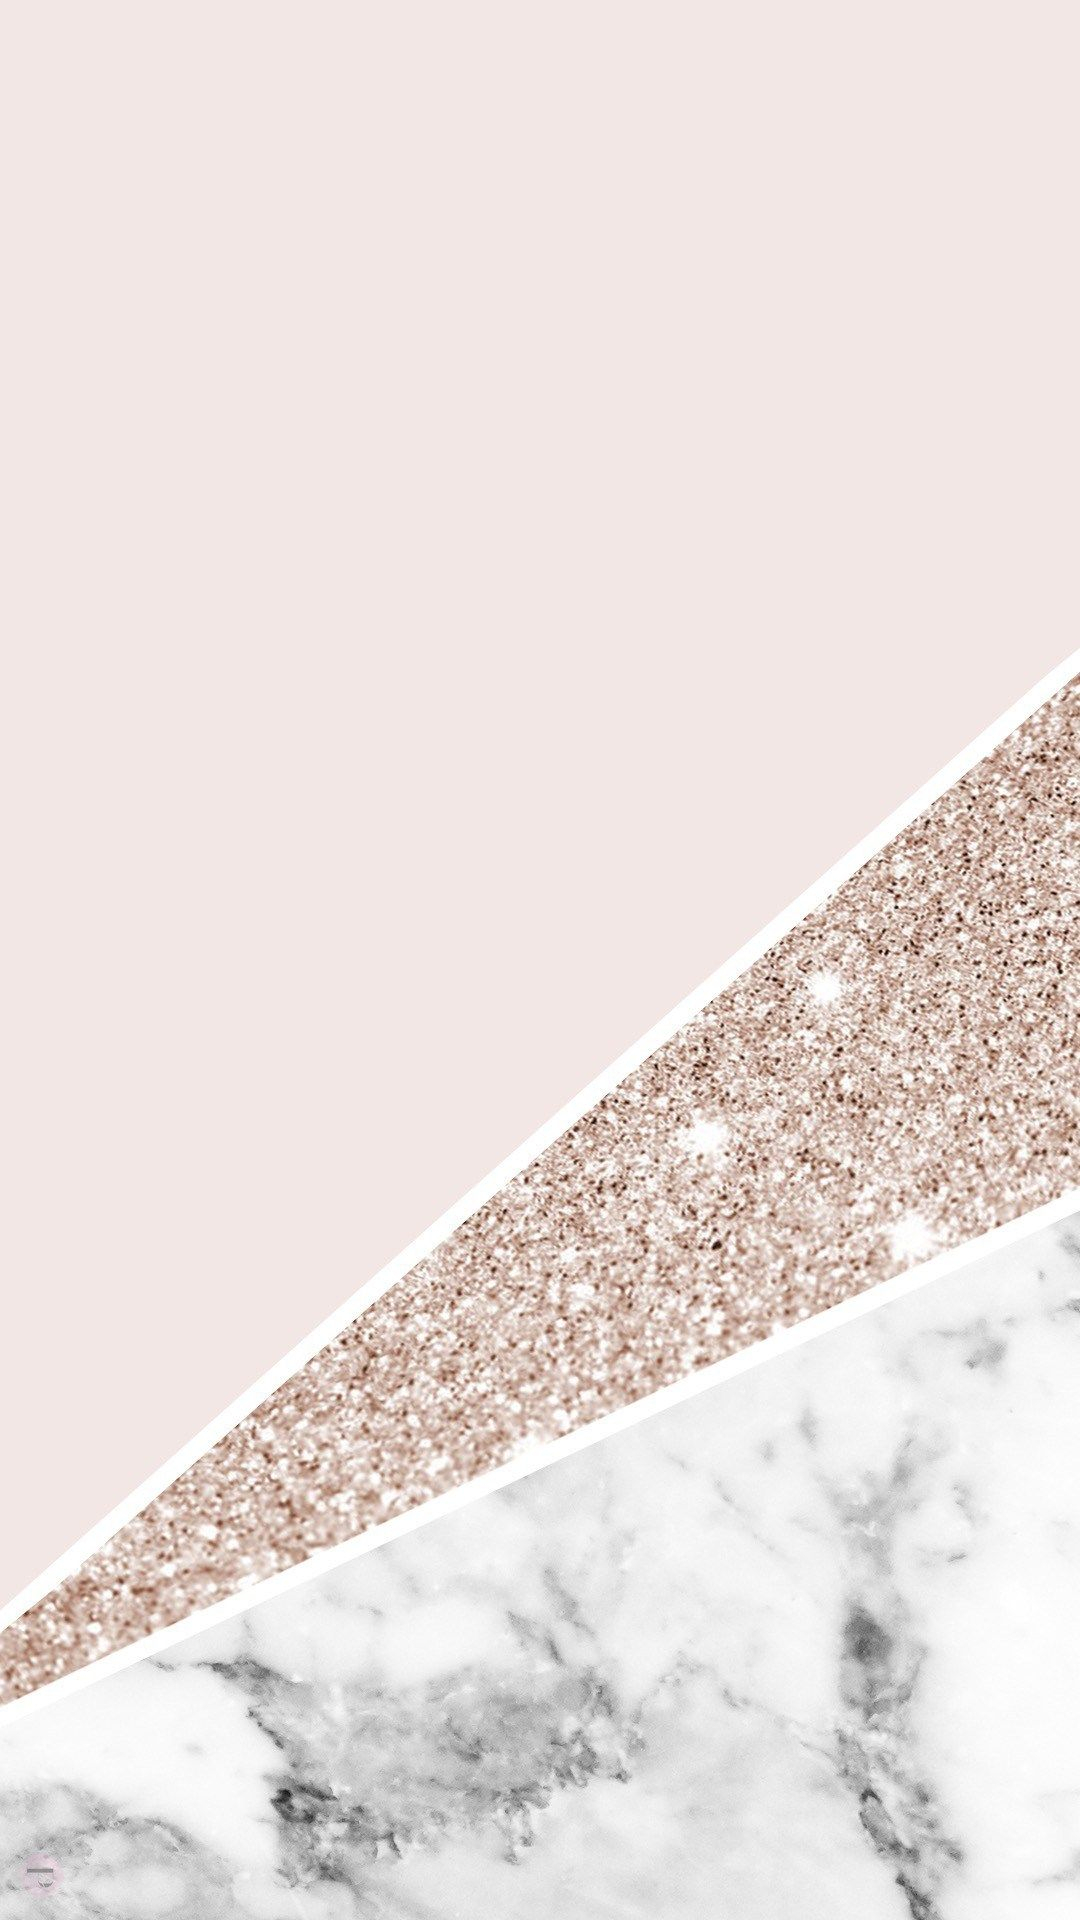 1080x1920 Rose Gold Cute Wallpaper High Quality Resolution &Acirc;&raquo; Hupages &Acirc;&raquo; Download Iphone Wallpapers | Pink marble wallpaper, Sparkle wallpaper, Marble iphone wallpaper